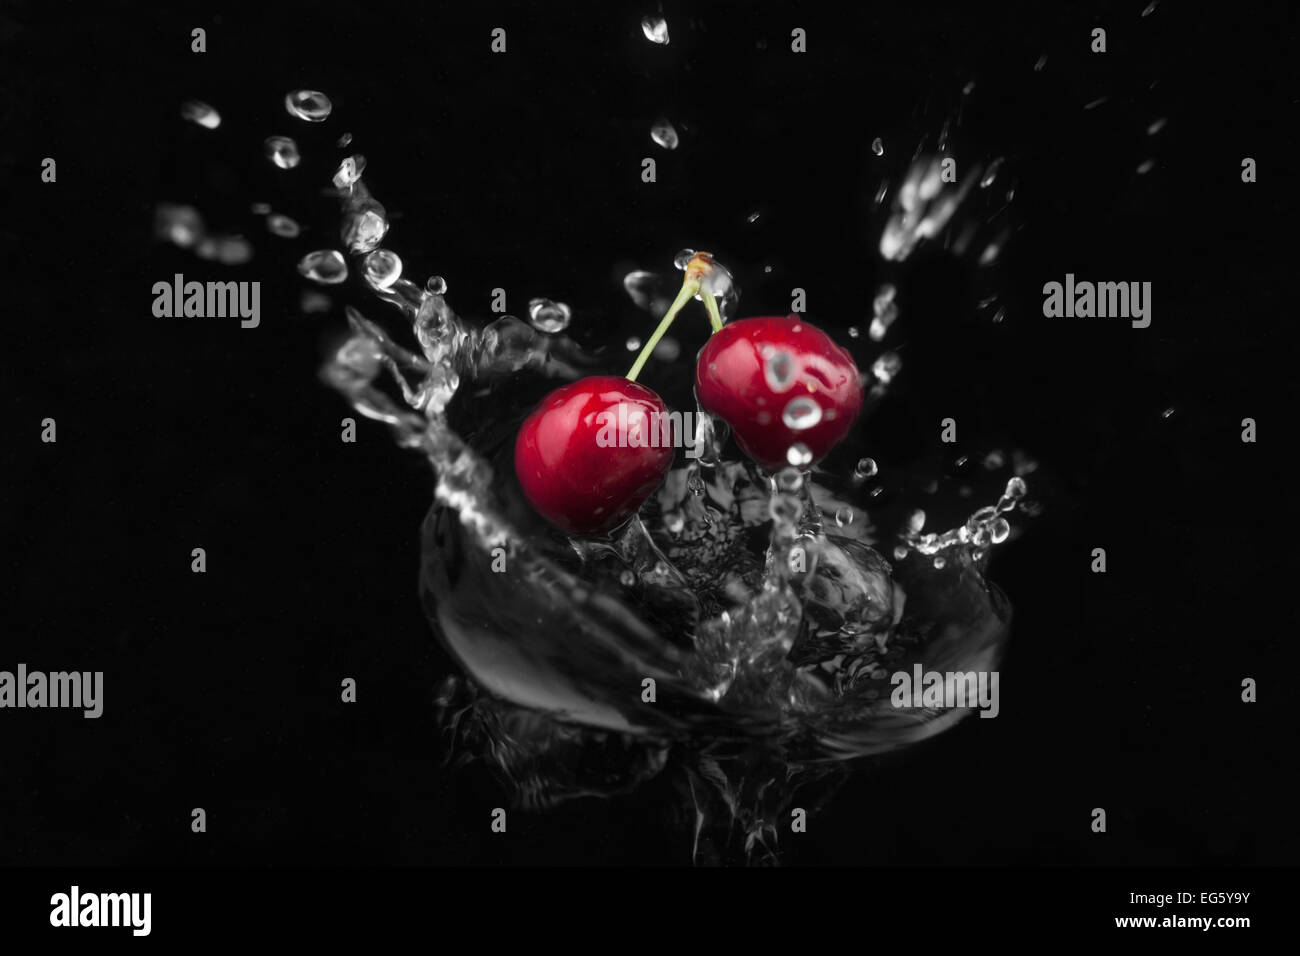 Cherry falling into the water on a black background Stock Photo